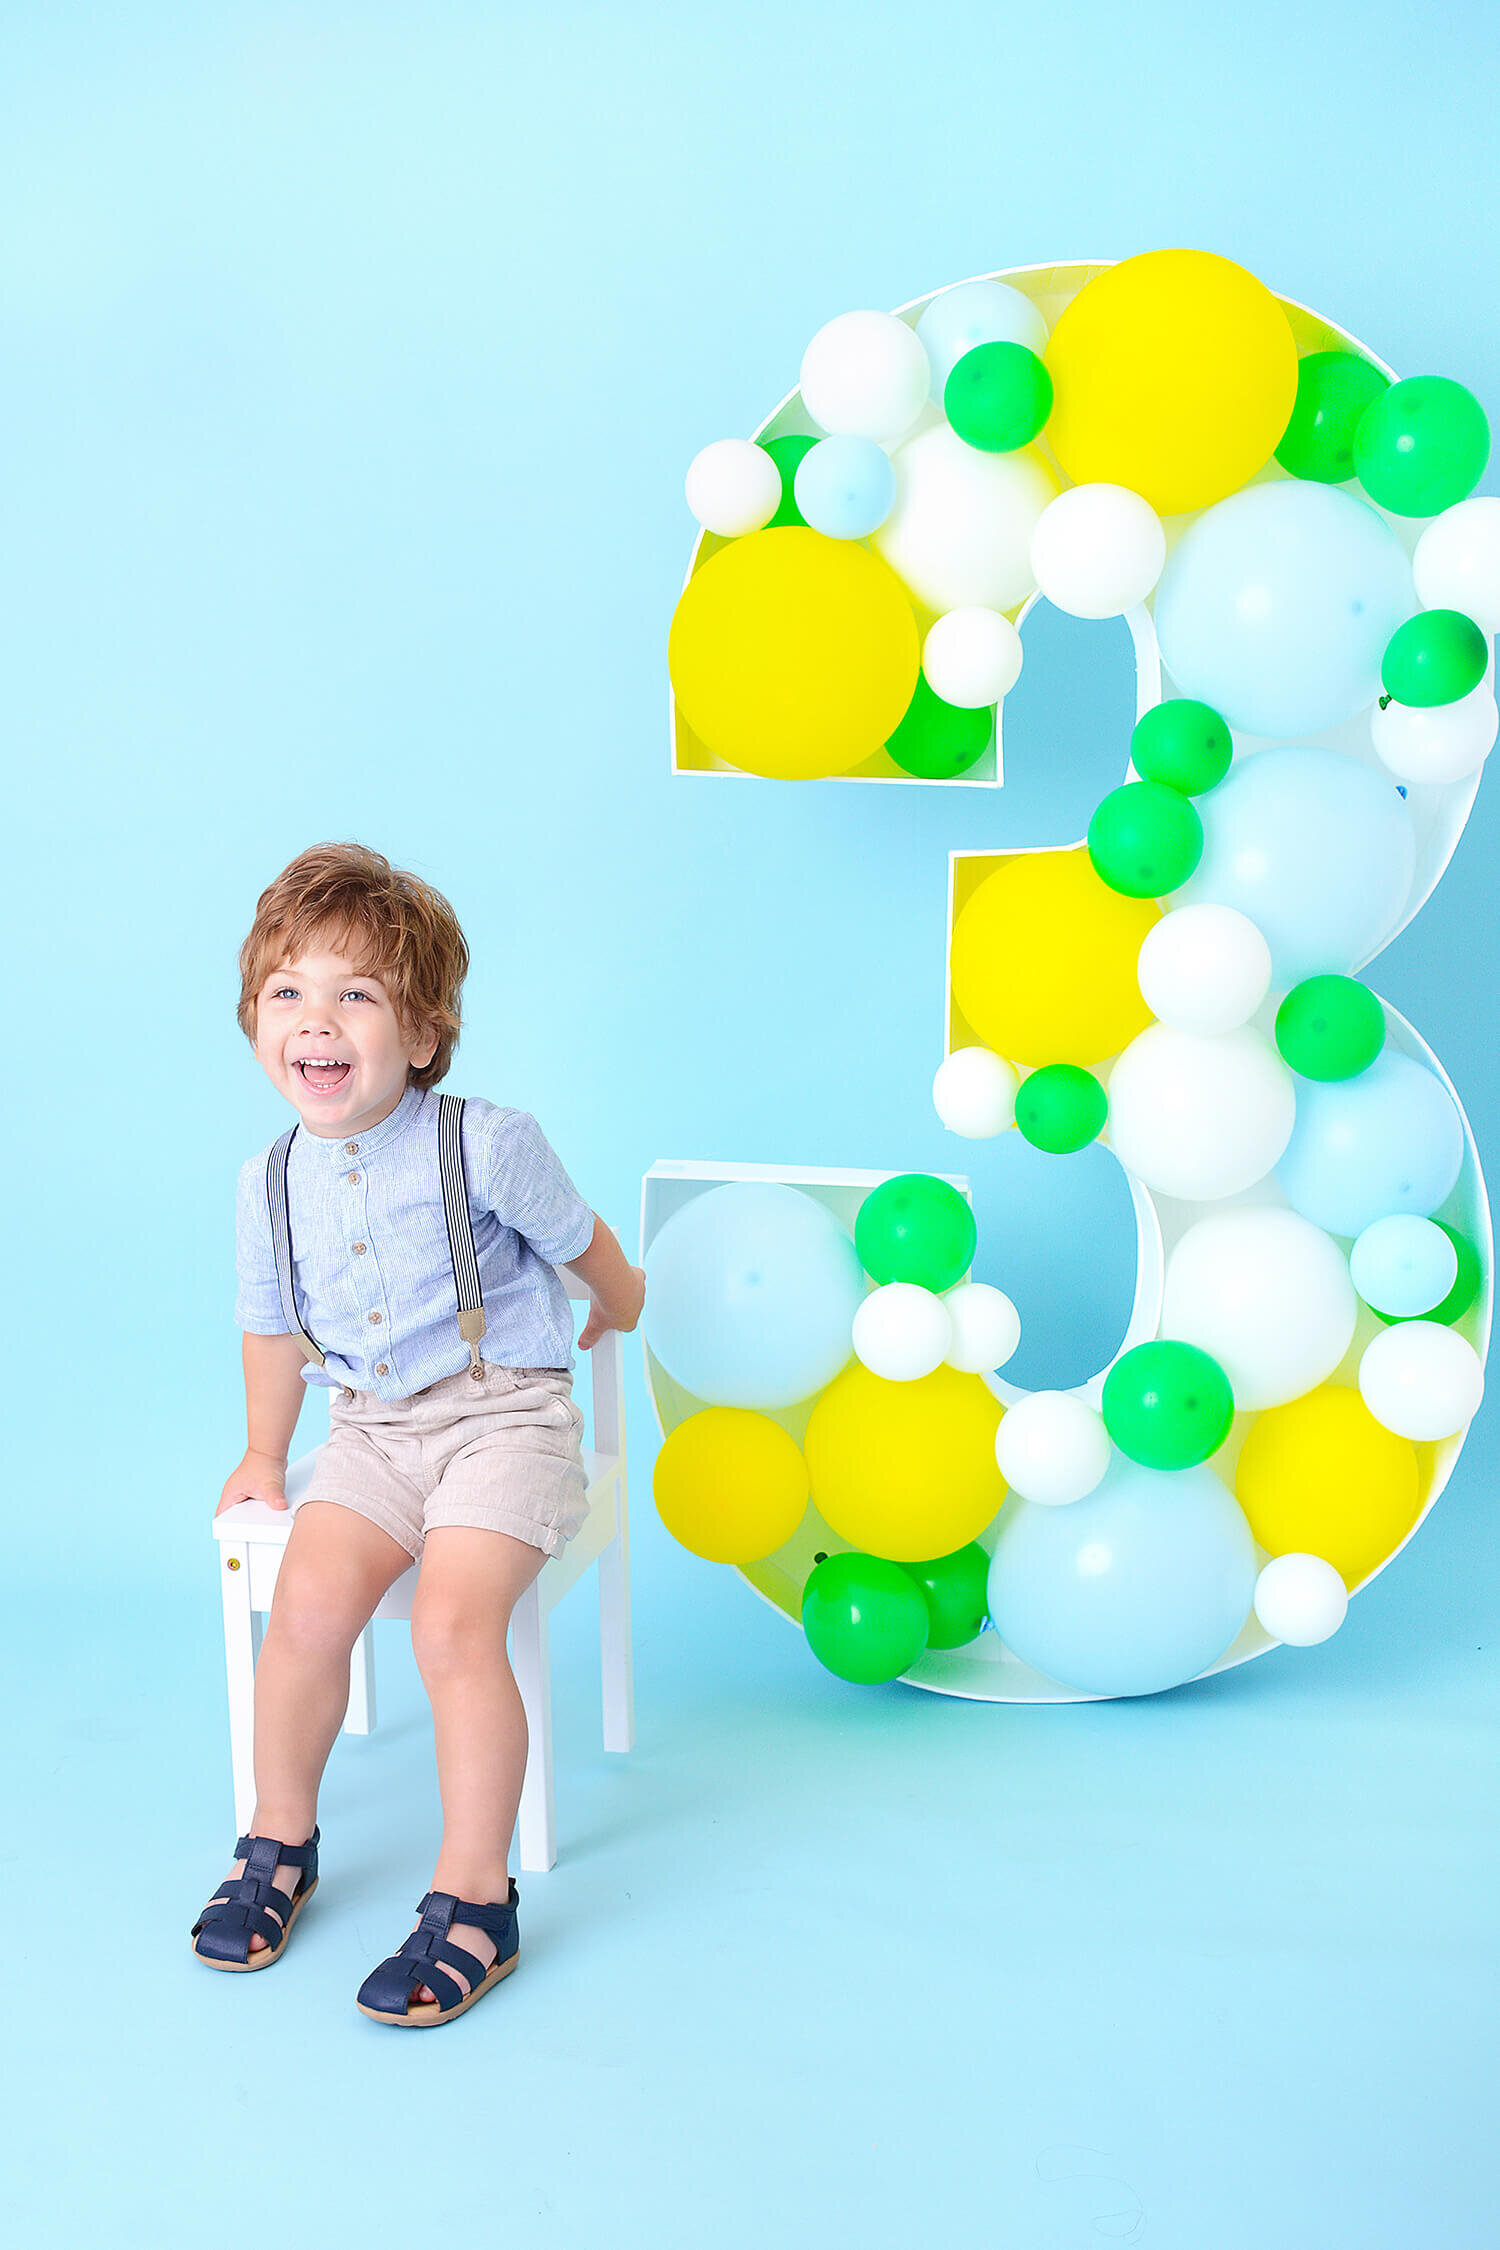 boy smiles at his 3rd birthday photoshoot with a large 3 made from balloons